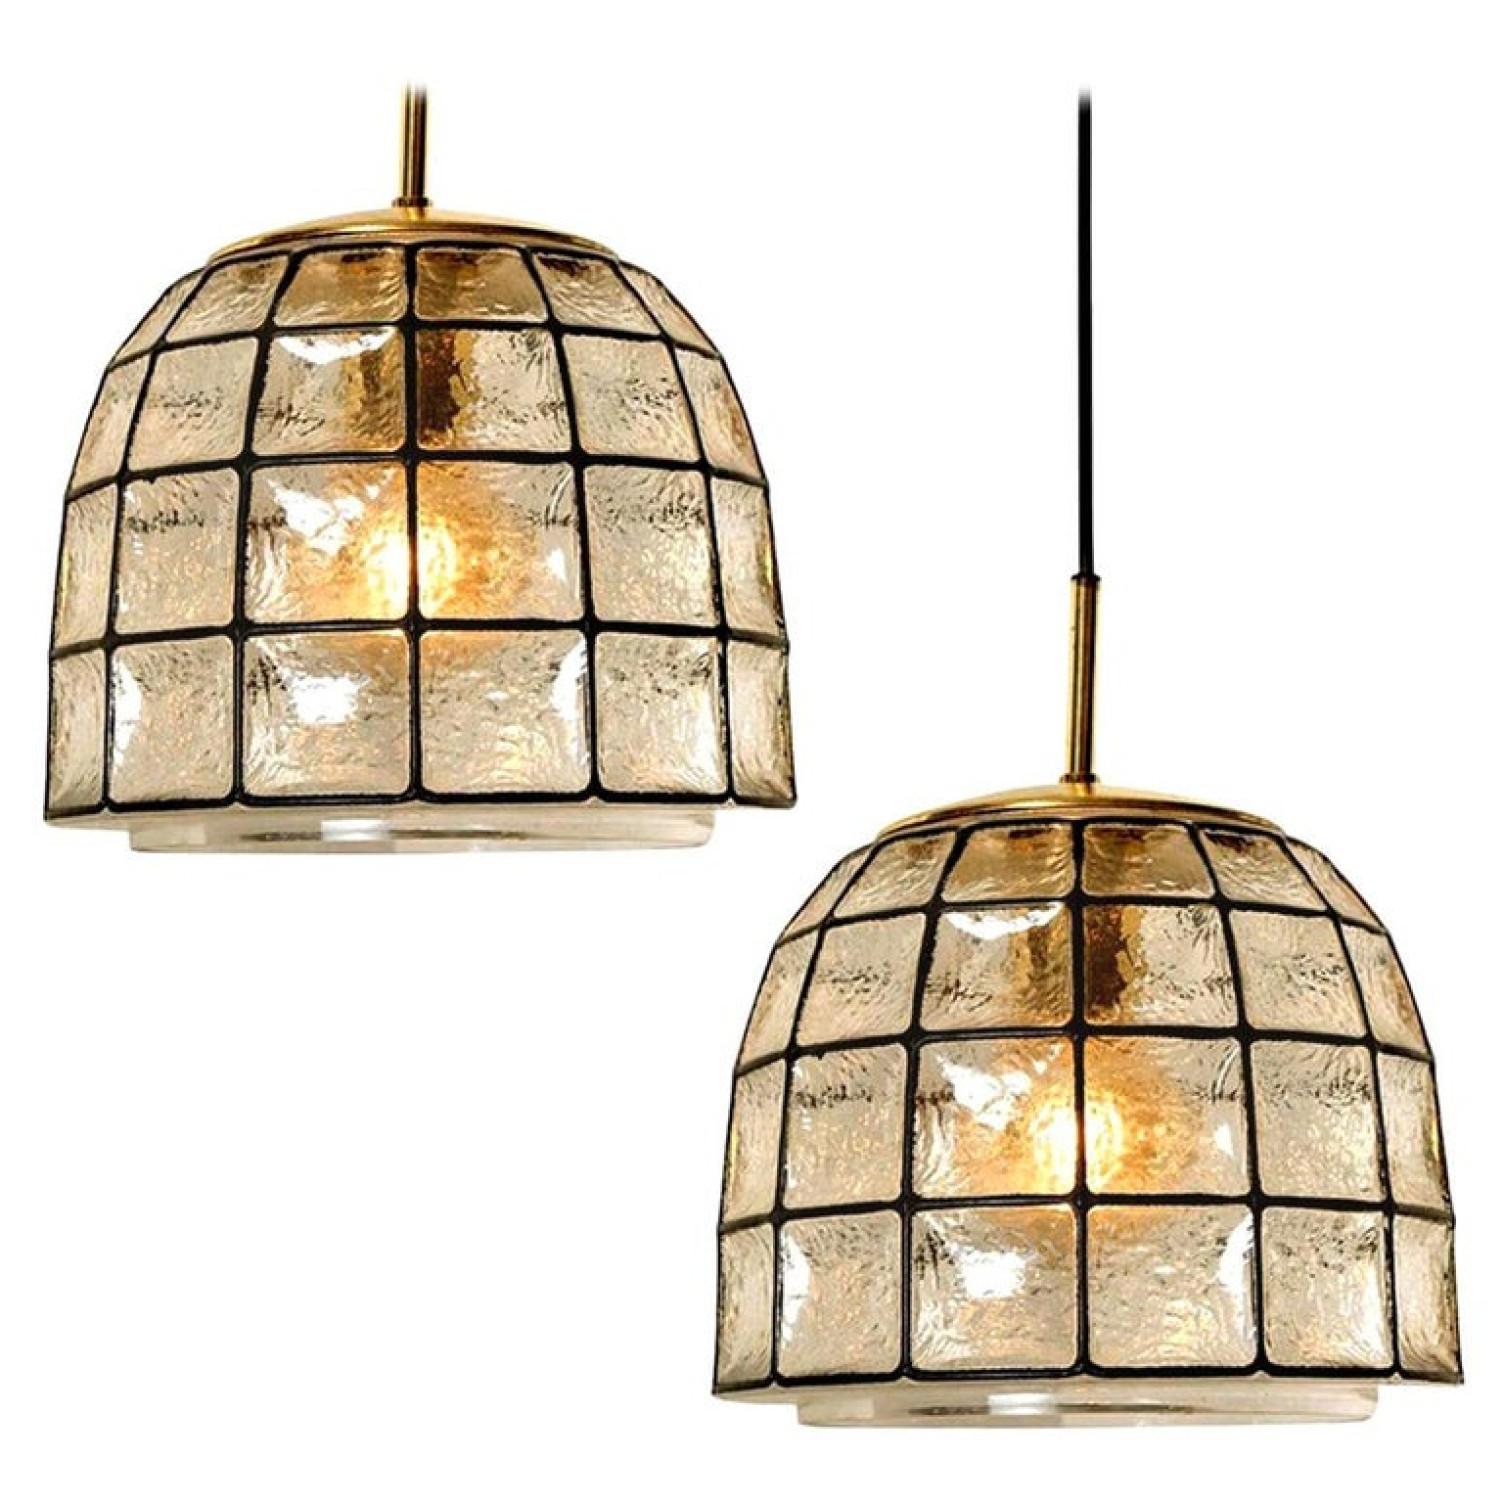 Minimal, geometric and simply shaped design. This beautiful and unique pair of hand blown glass chandeliers or pedant lights were manufactured by Glashütte Limburg in Germany during the 1960s, (late 1960s or early 1970s). Beautiful craftsmanship.